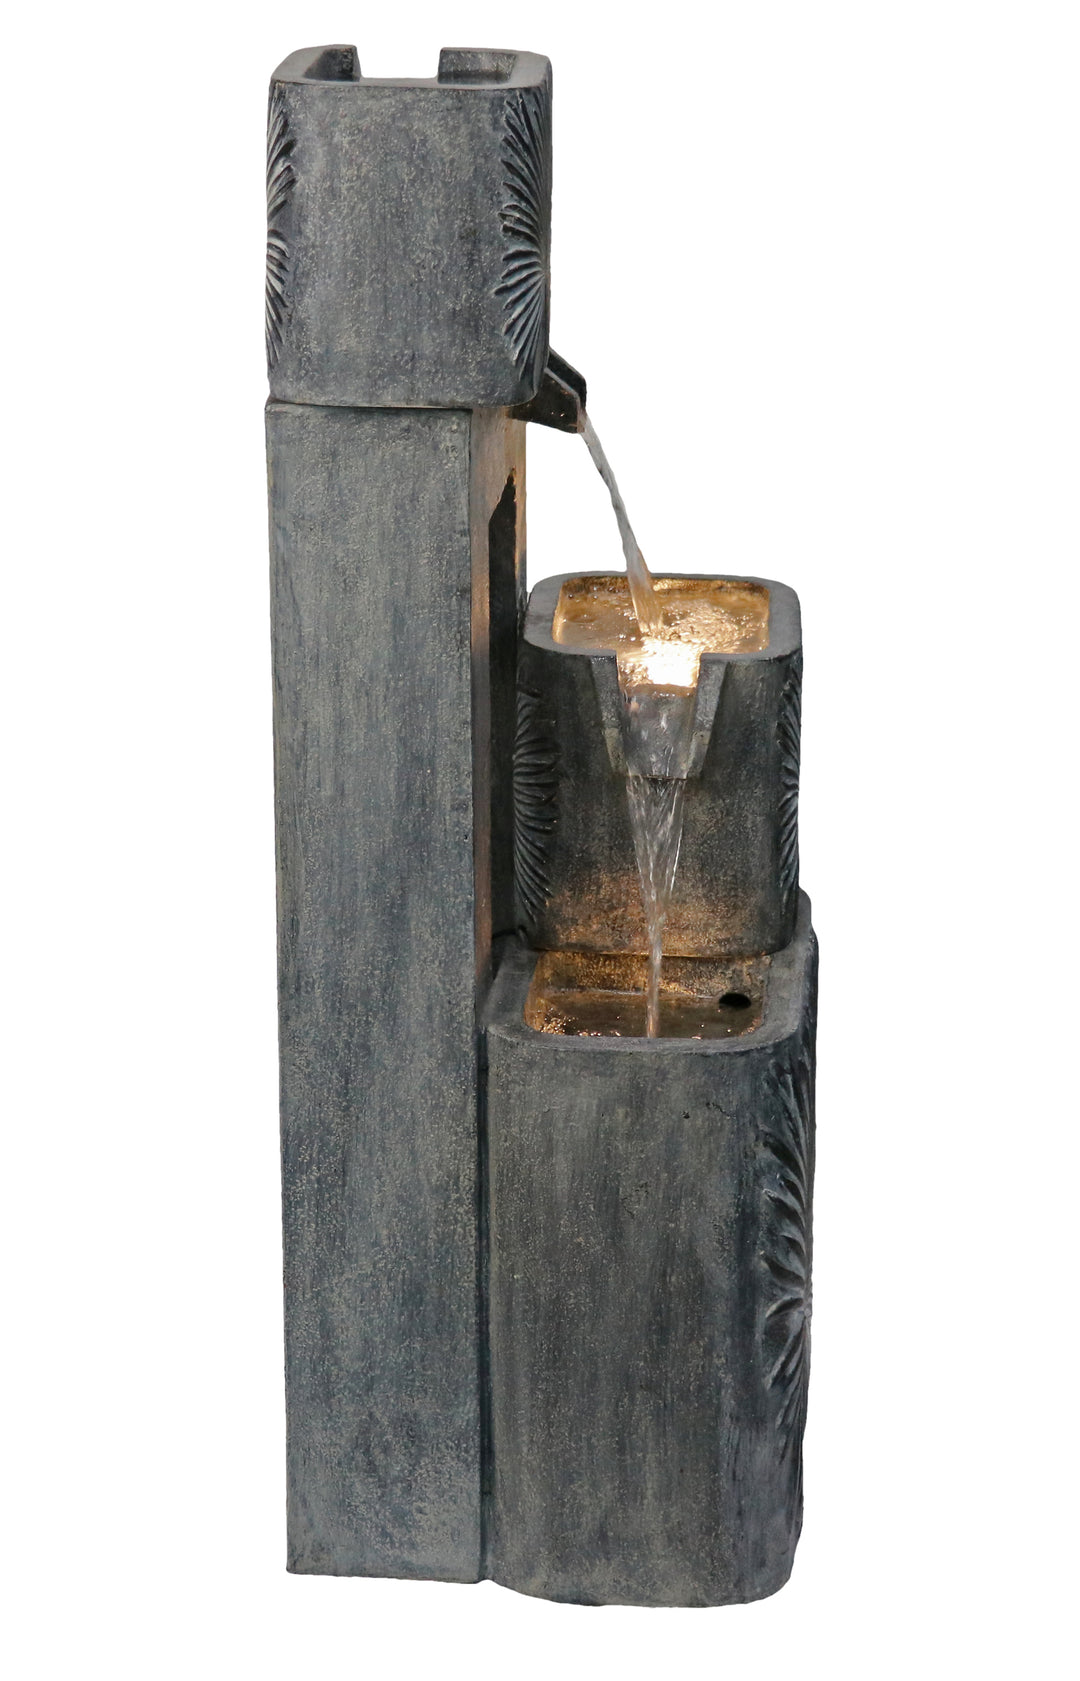 79743 - 3 Tiers Modern Cascading Water Fountain Outdoor with Warm White LEDS Hi-Line Gift Ltd.